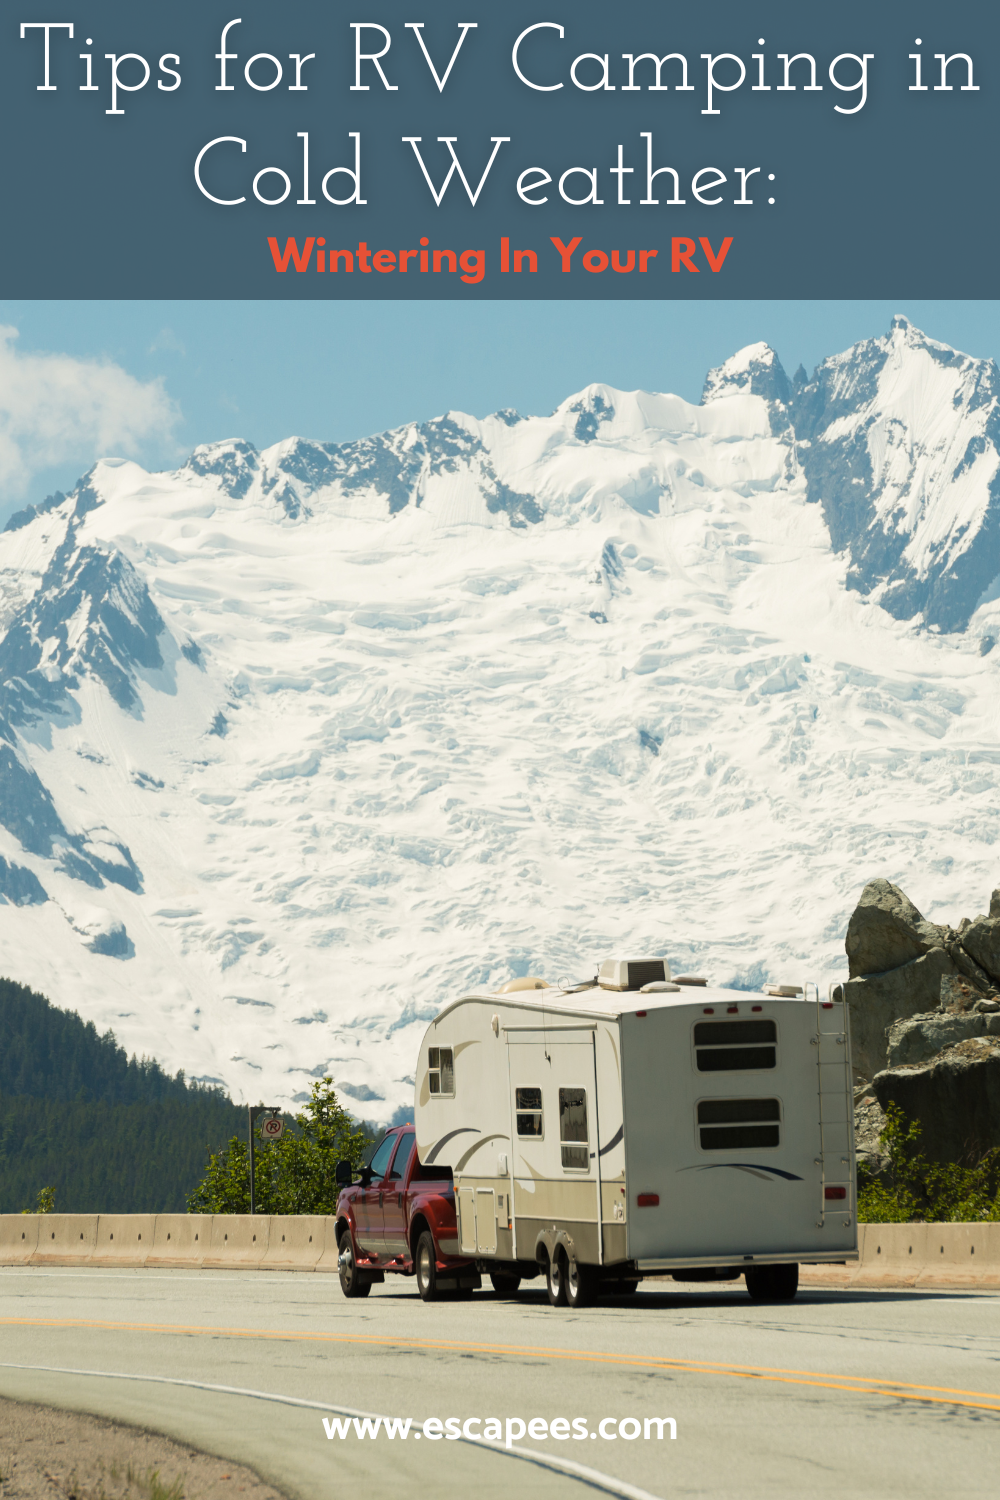 Tips for RV Camping in Cold Weather: Wintering in Your RV 5